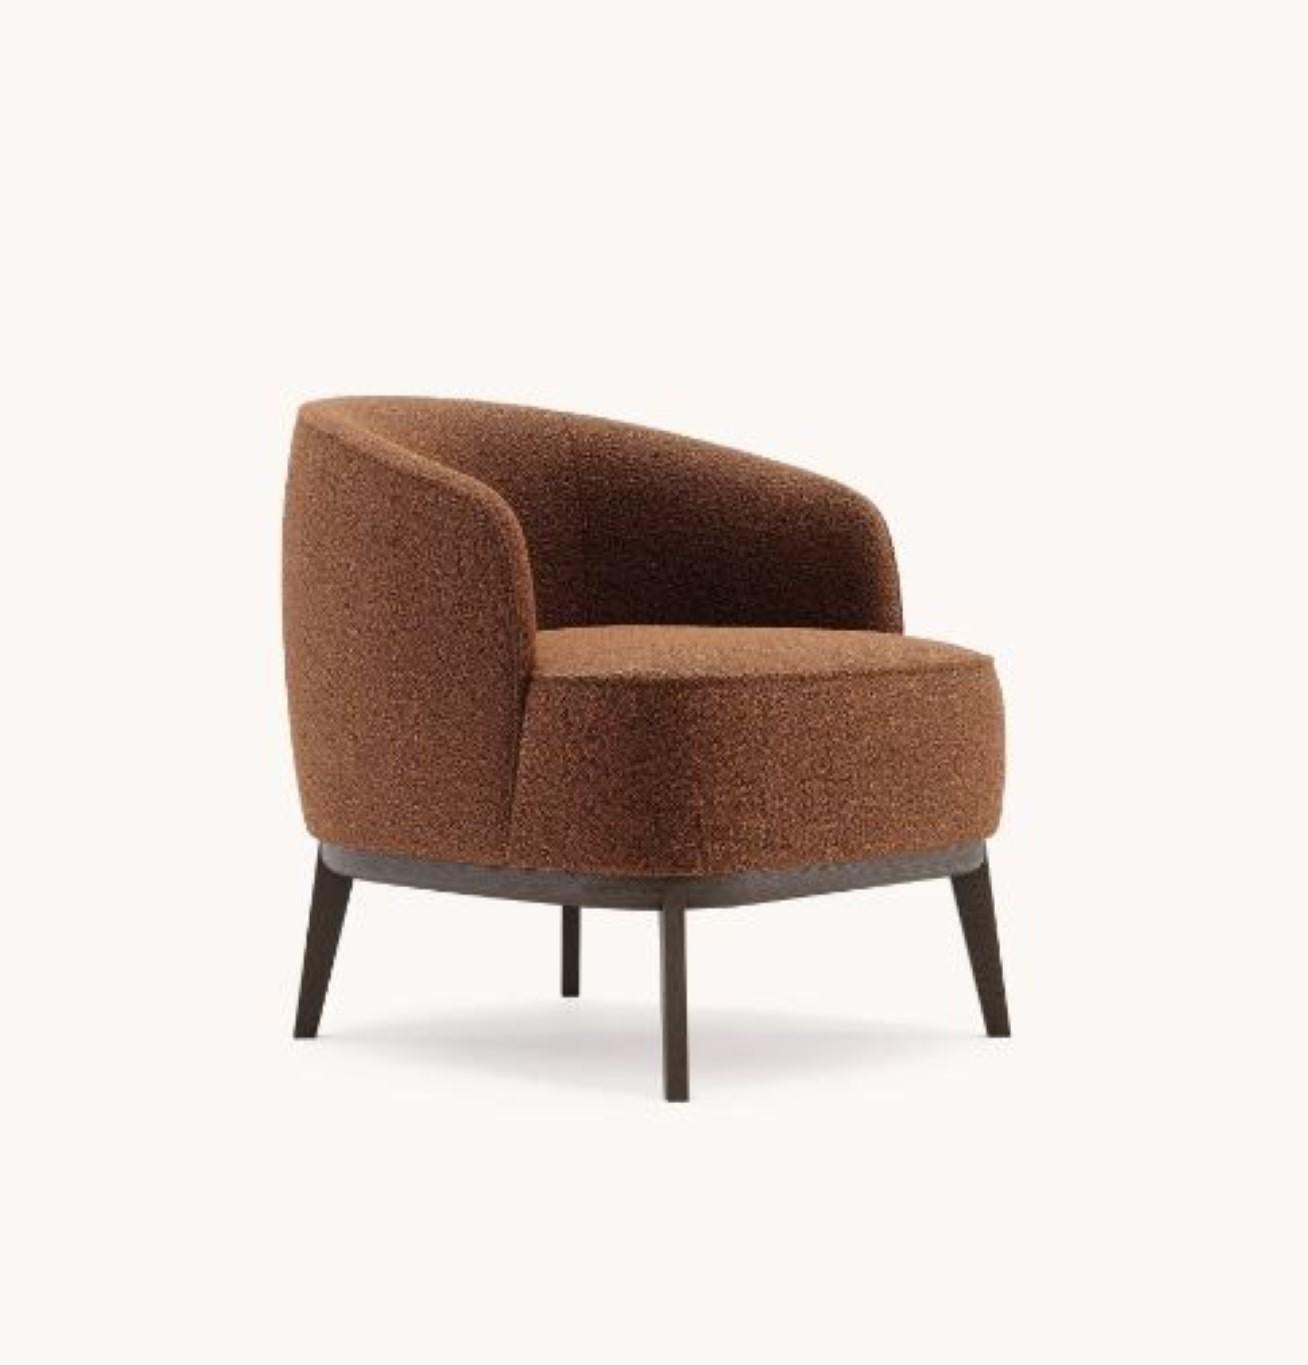 Megan Armchair by Domkapa
Materials: Fabric Structure: Columbia Brick, Fabric Piping: Columbia Brick, Legs: Fumé Stained Ash.
Dimensions: W 68 x D 75,5 x H 71 cm. 
Also available in different materials. Please contact us. 

Domkapa holds a